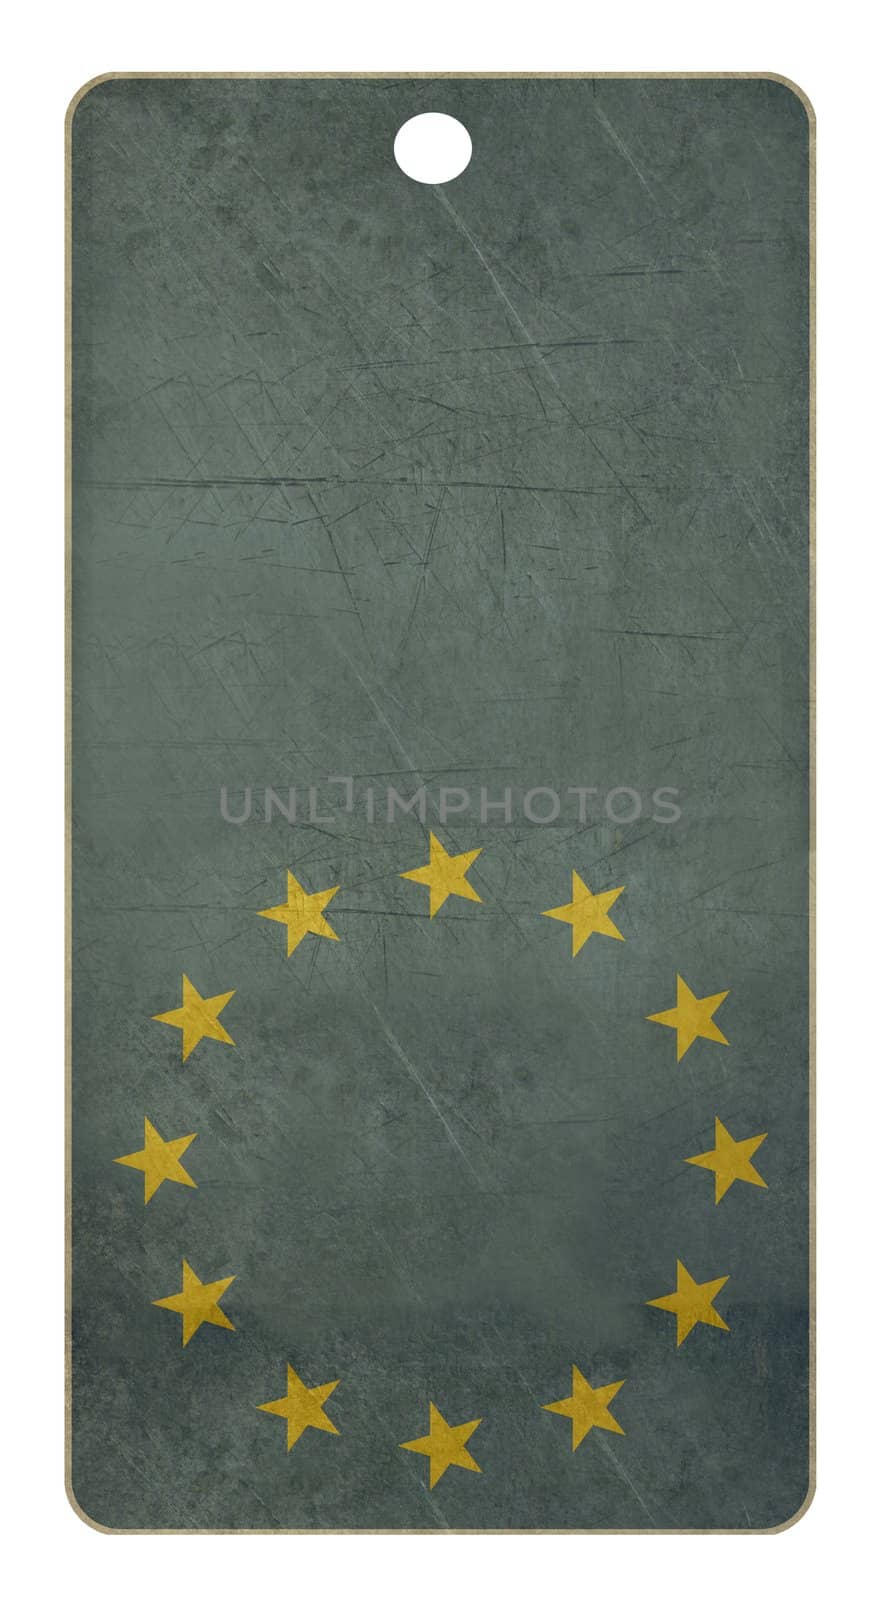 European union travel tag isolated on white background with copy space.
